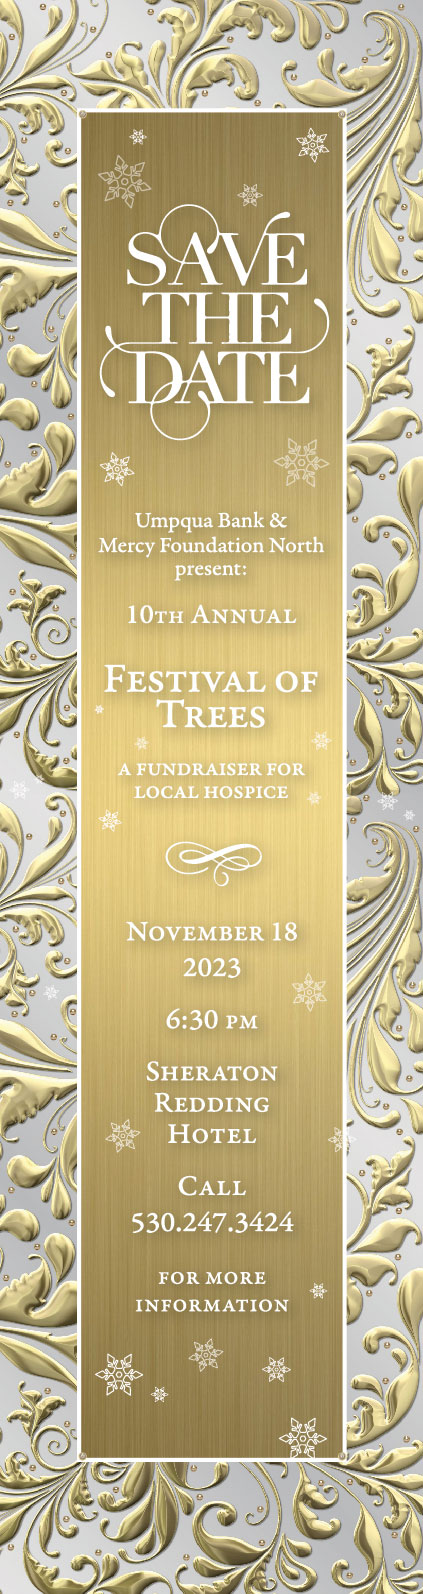 Festival of Trees Banner - with text info on event